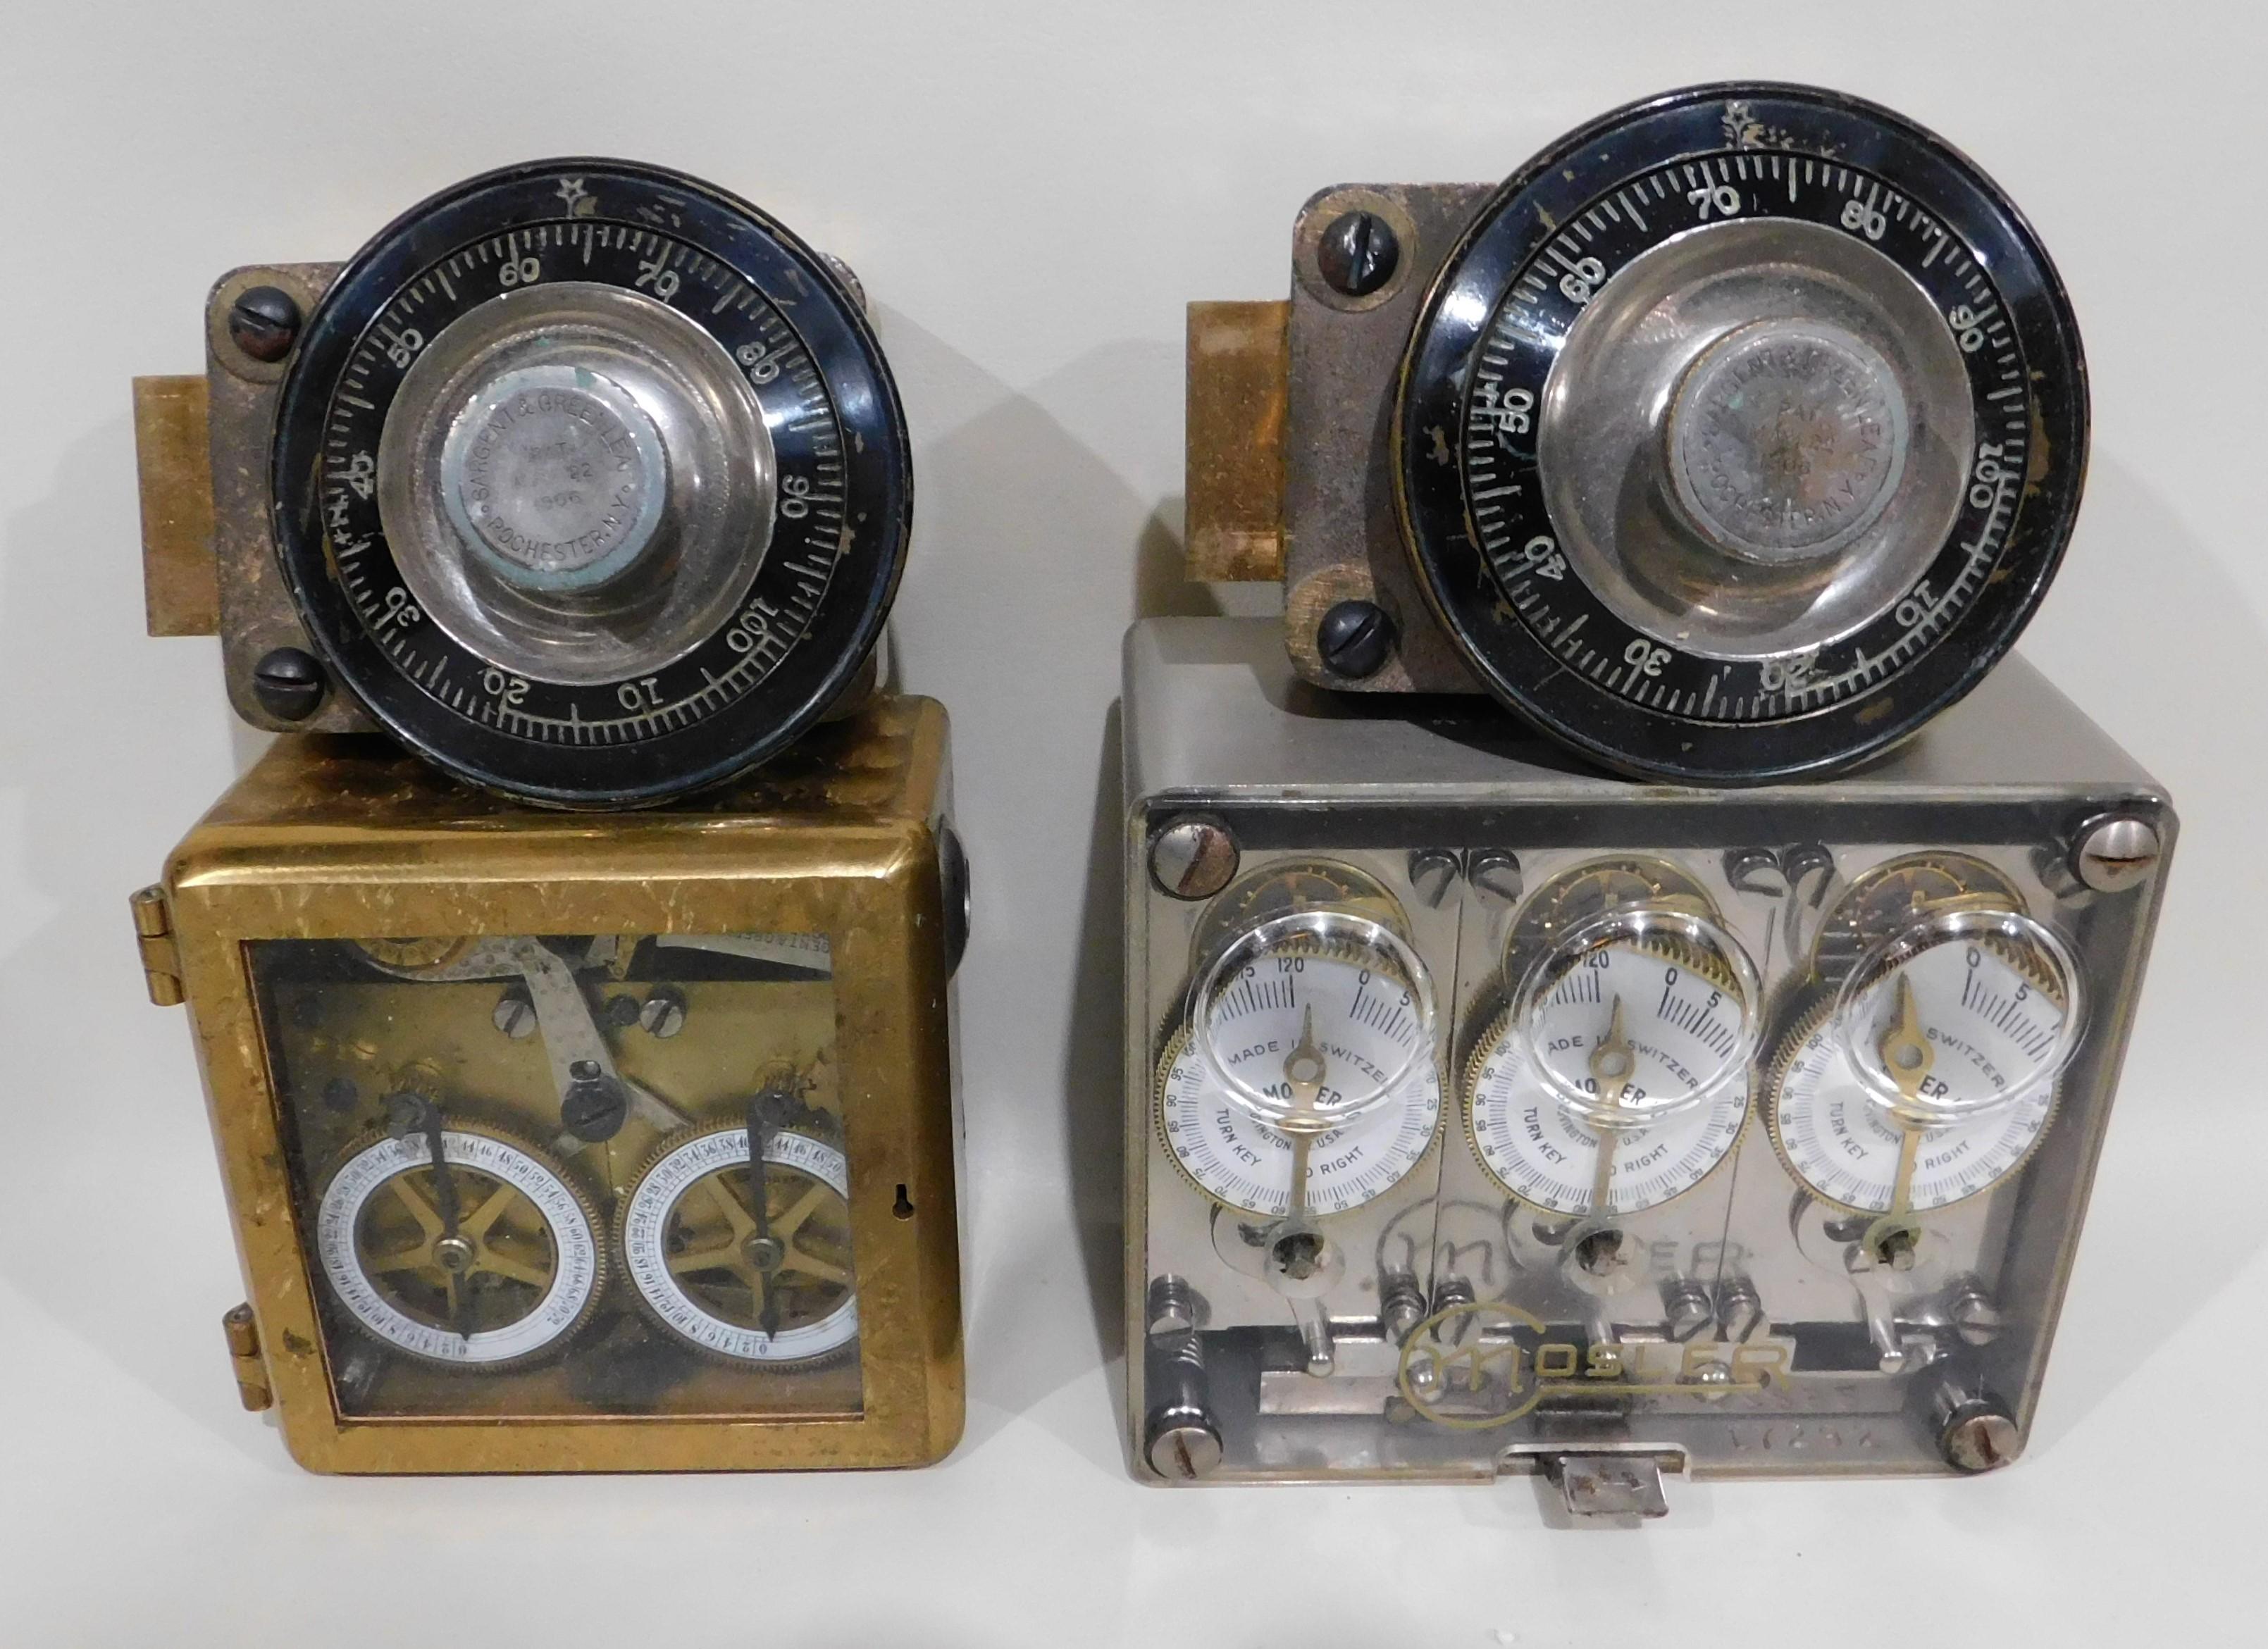 Pairs of Sargent and Greenleaf tumblers pattented 1907 and one timer patented 1877, the other 3 movement time lock was made by Mosler Buffalo New York, circa 1910-1930. These were salvaged from a bank from Williams Street in New York city's